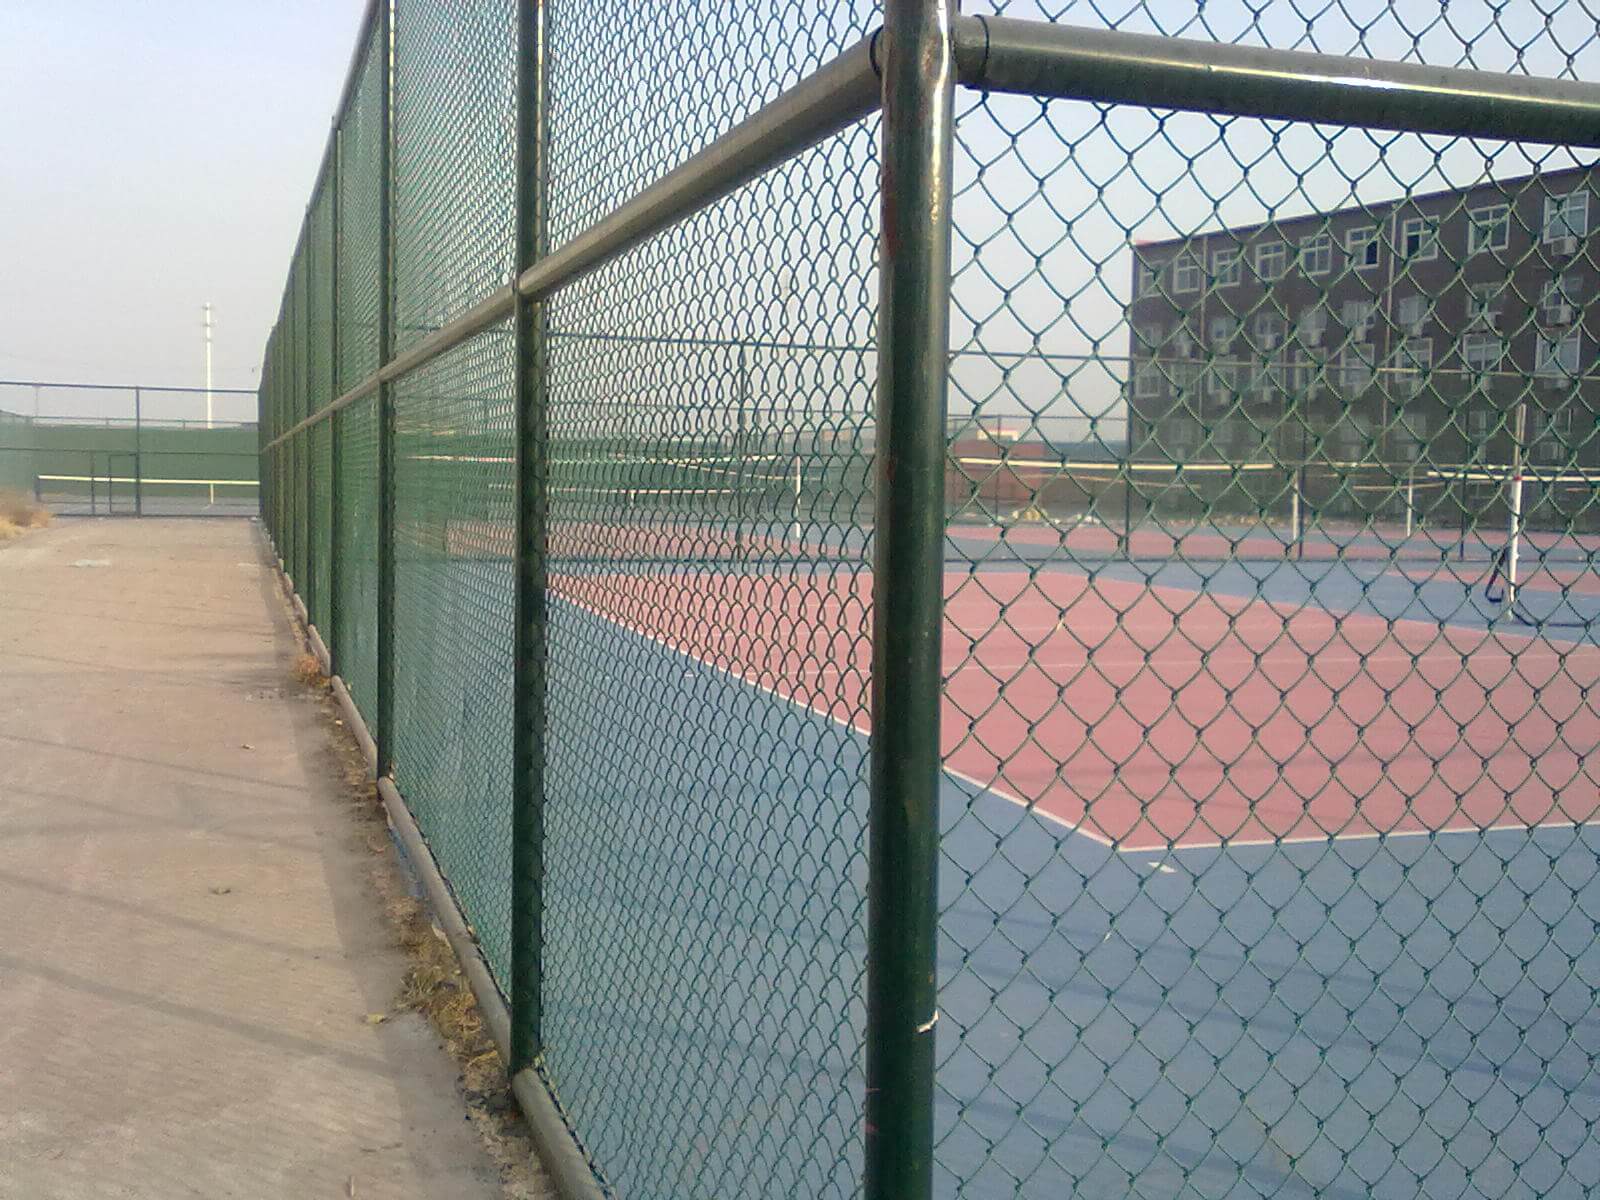 Wire Mesh Fences: Versatile Solutions for Different Applications